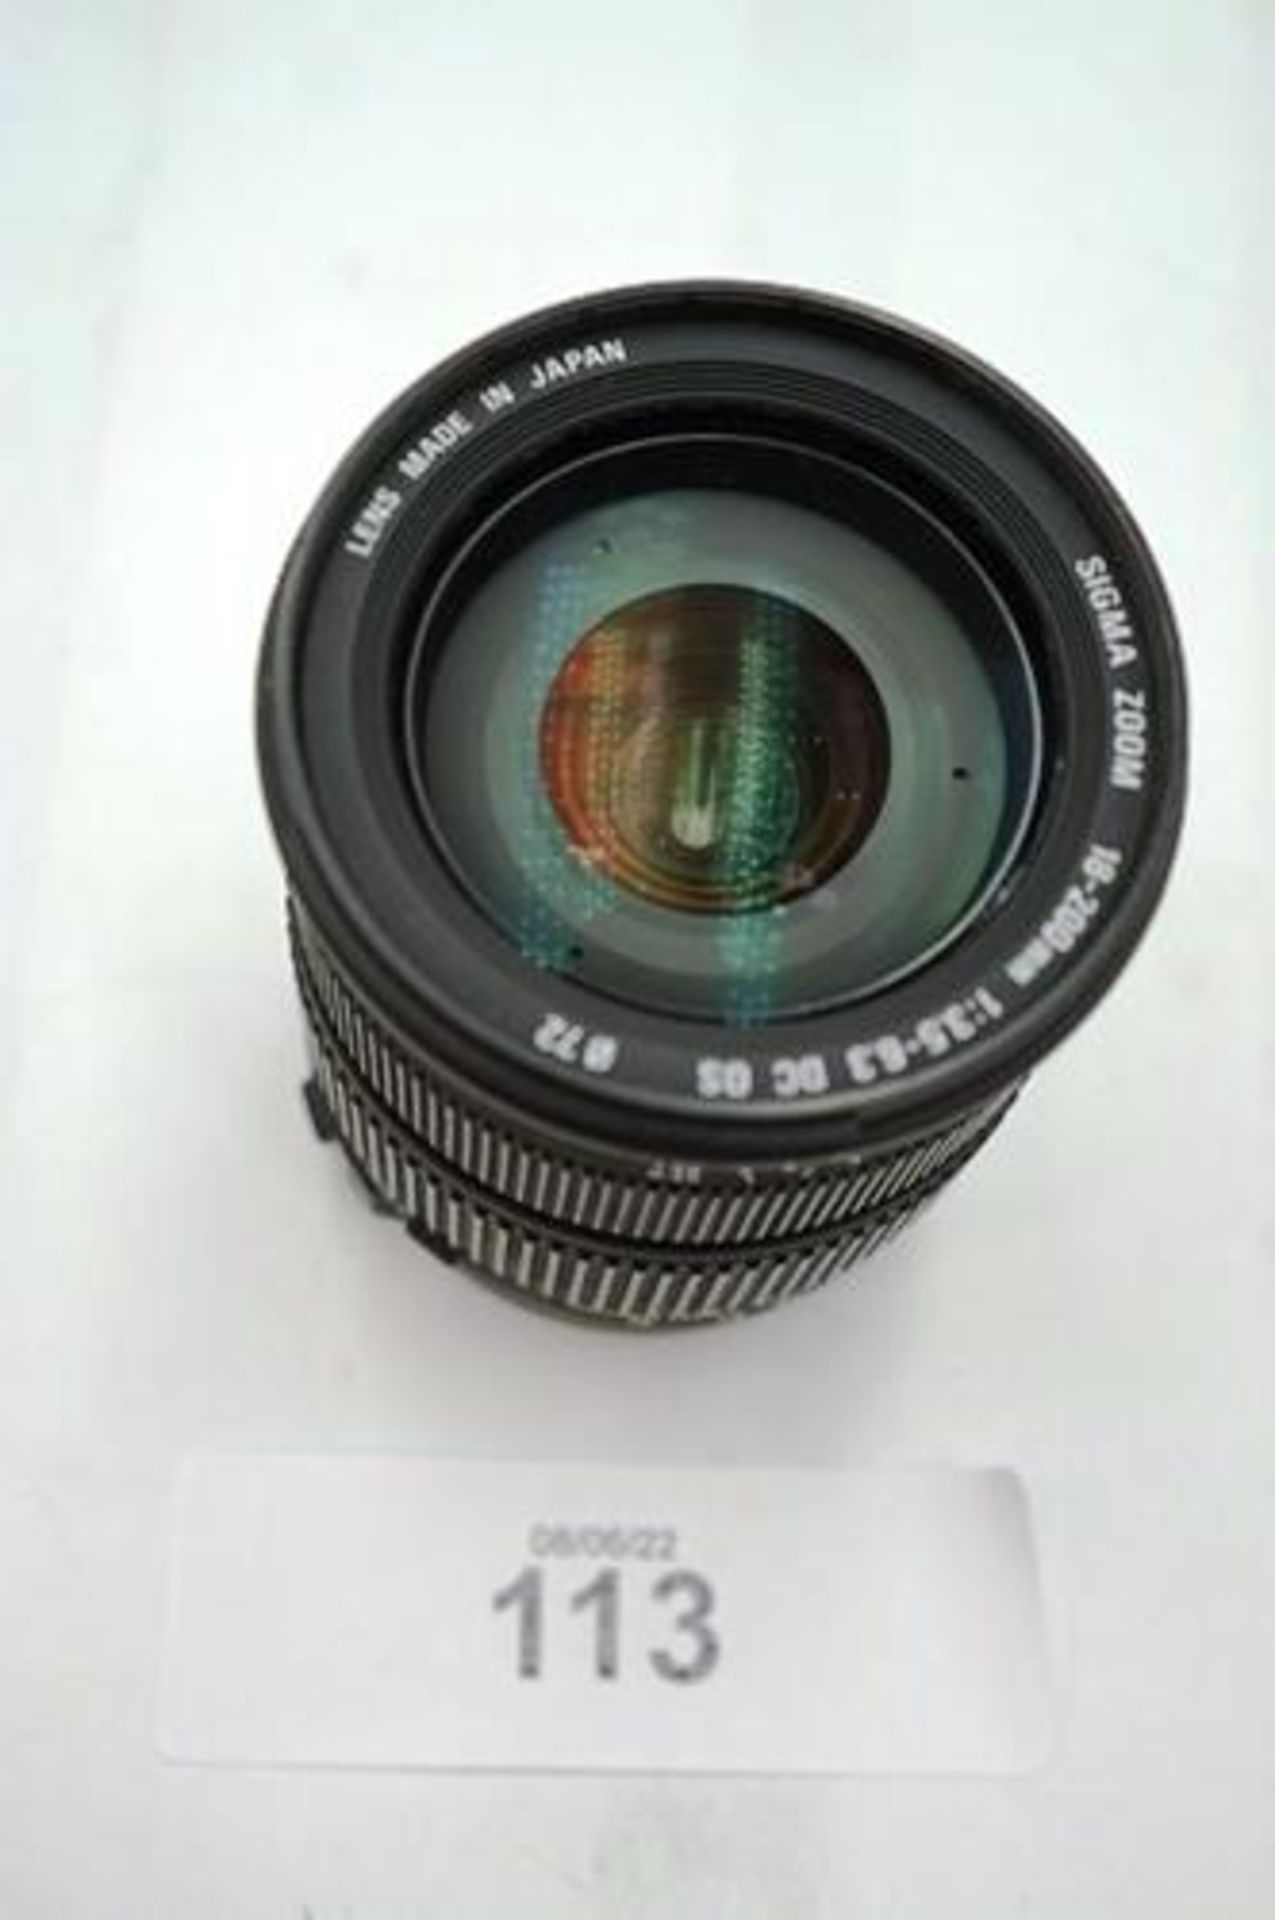 1 x Canon Sigma DC 18-200mm, 1:3.5 - 6.3 camera lens - Second-hand, tested working (Cab1) - Image 4 of 4